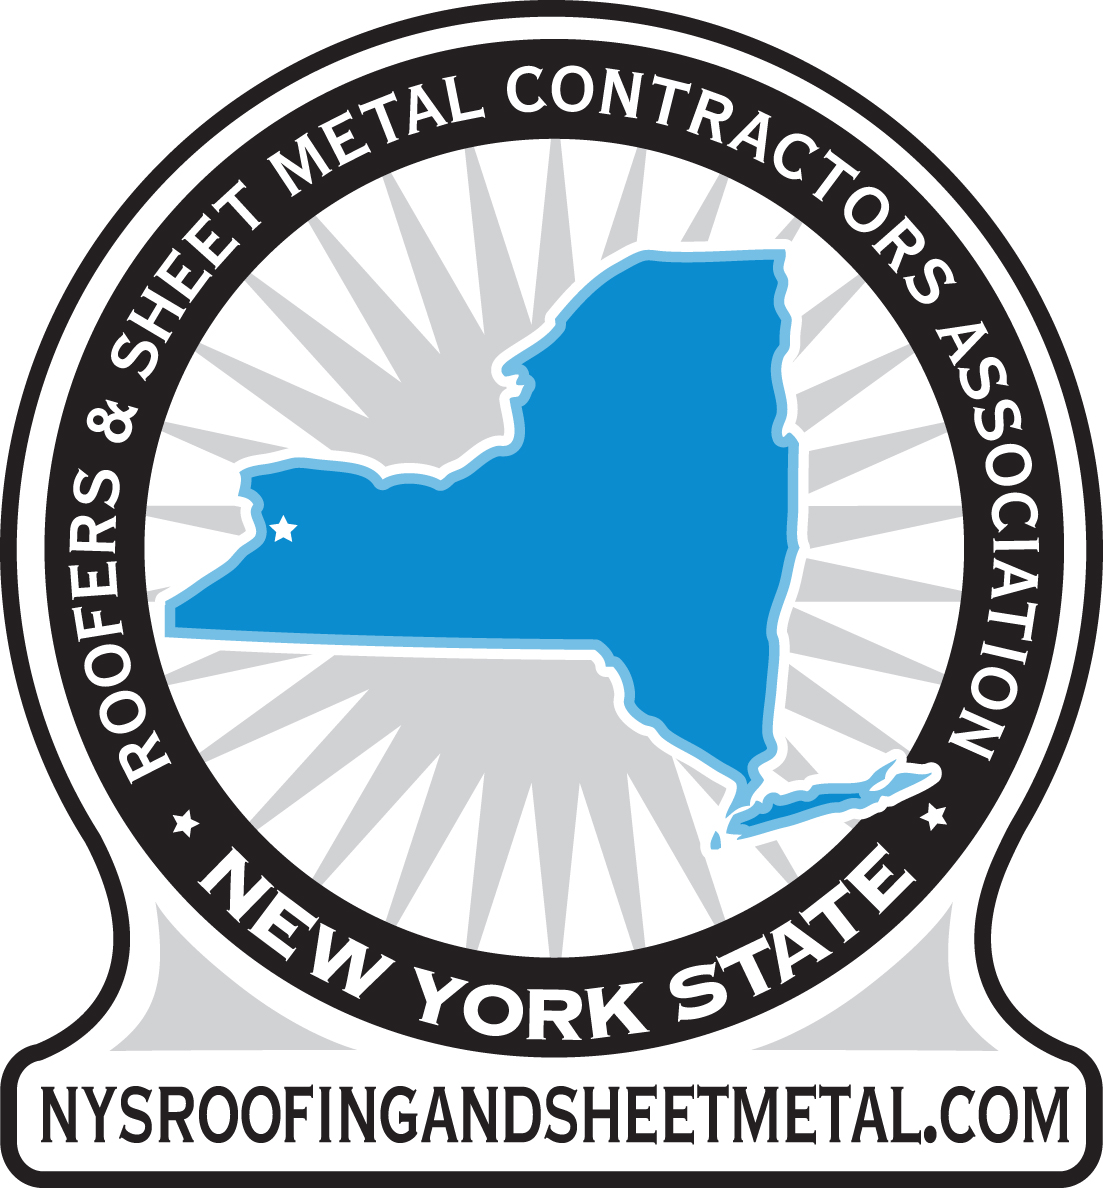 Roofers & Sheet Metal Contractors Association of New York State logo